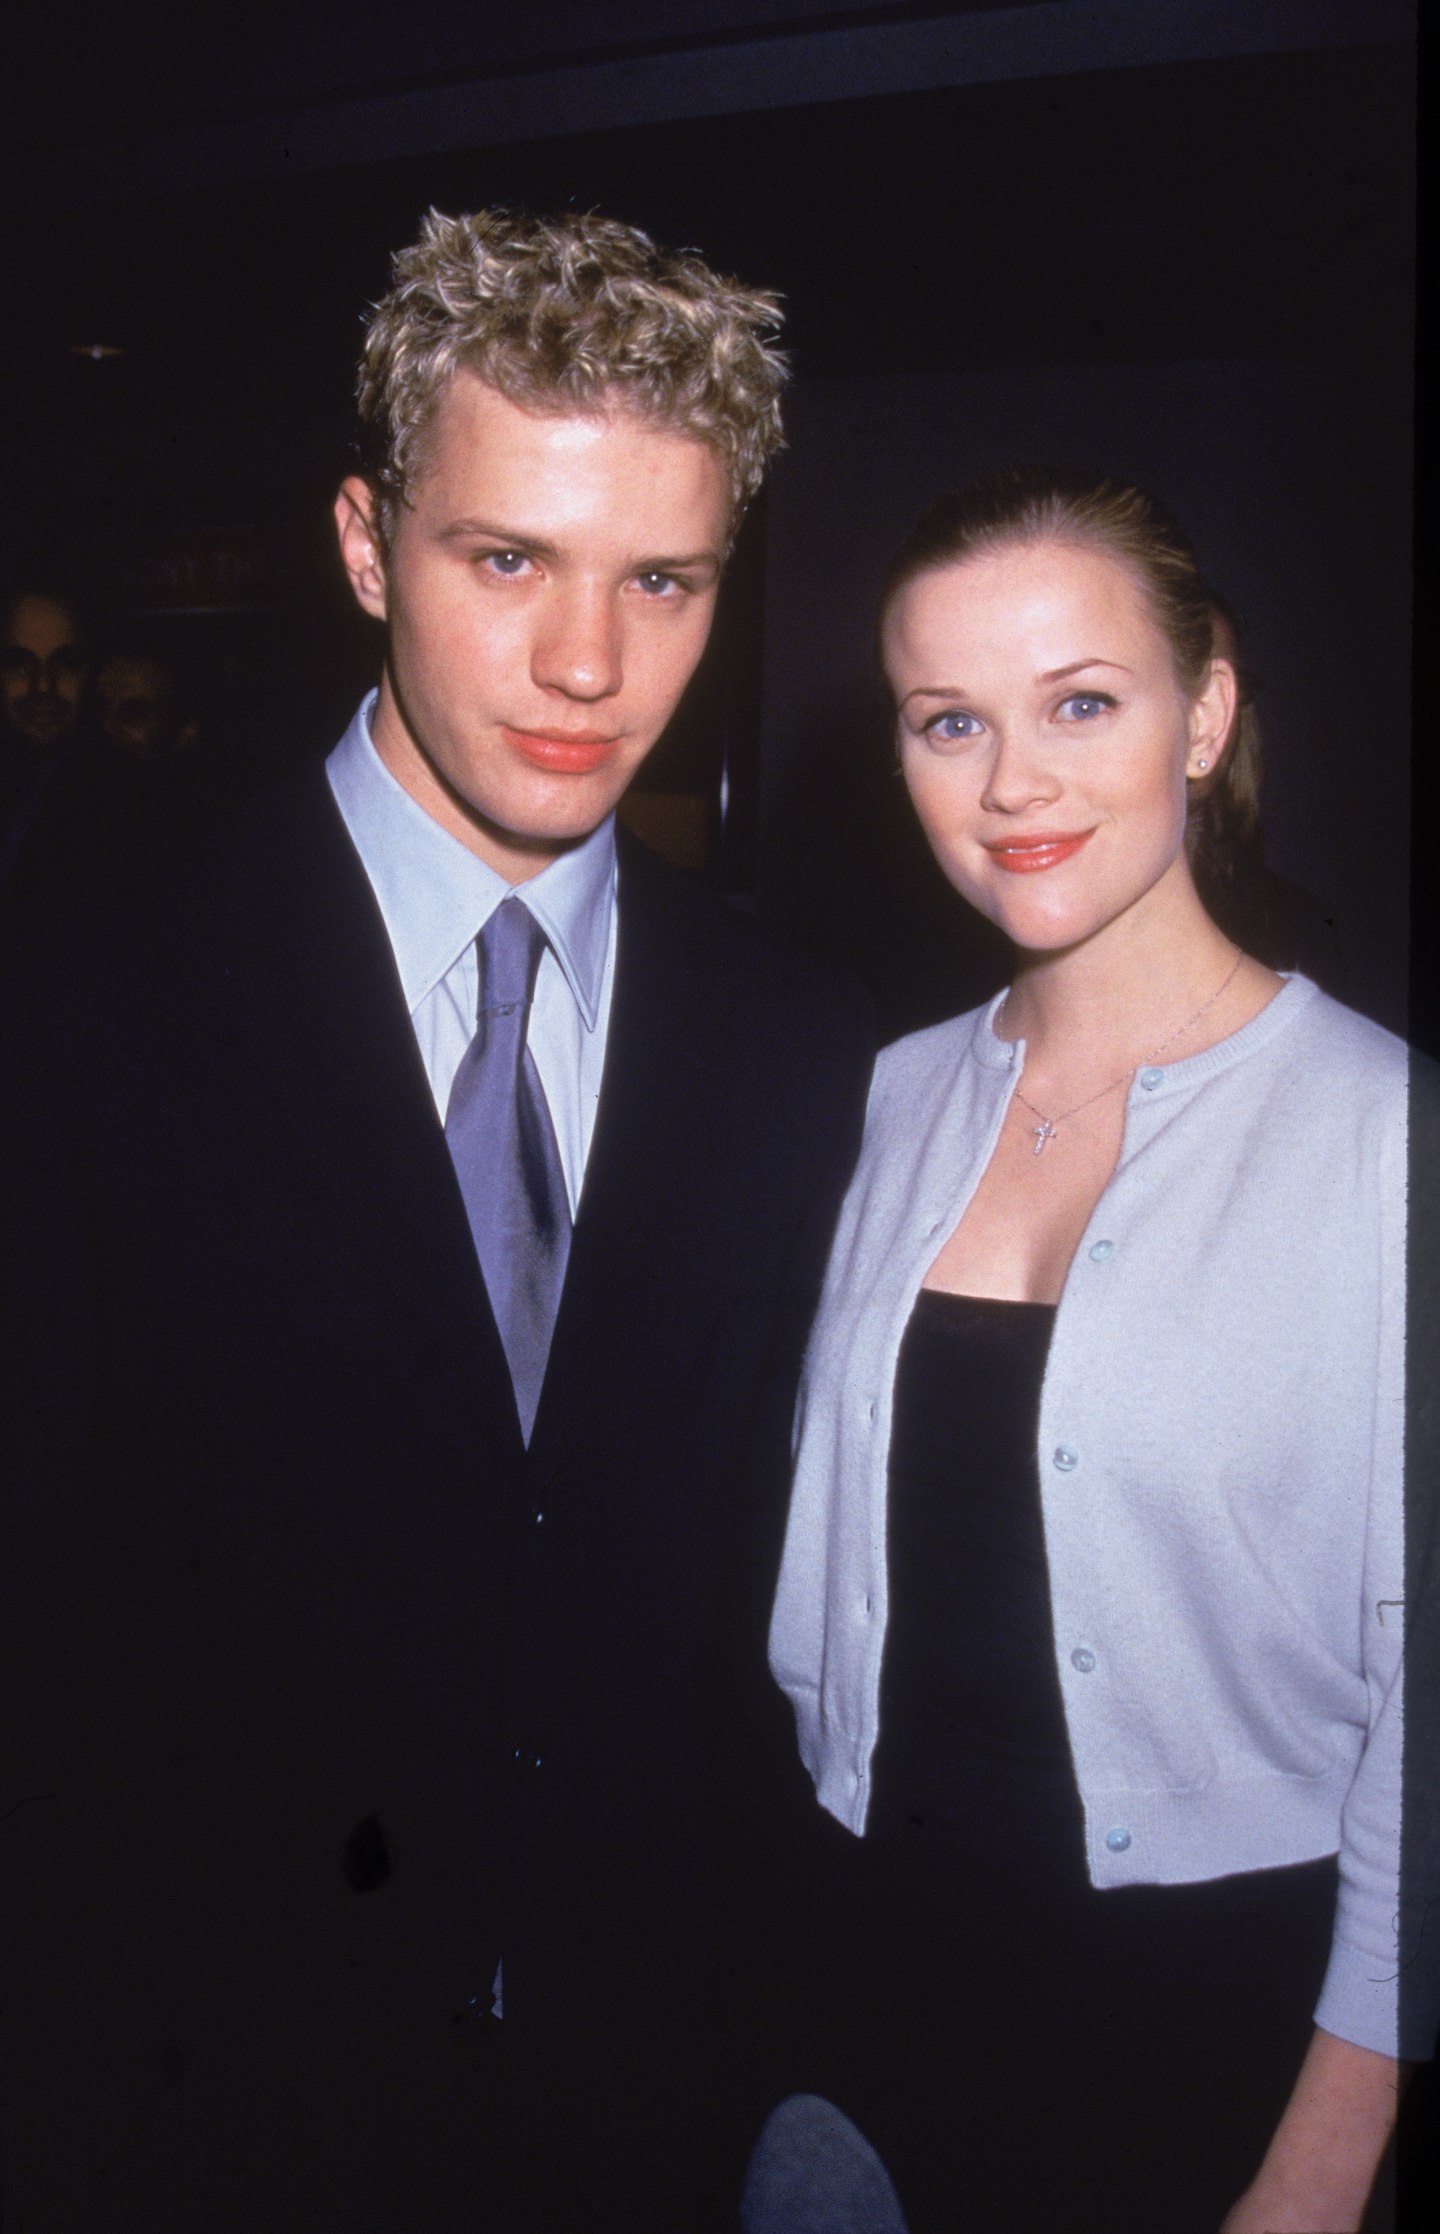 1999 – Ryan Phillippe and Reese Witherspoon